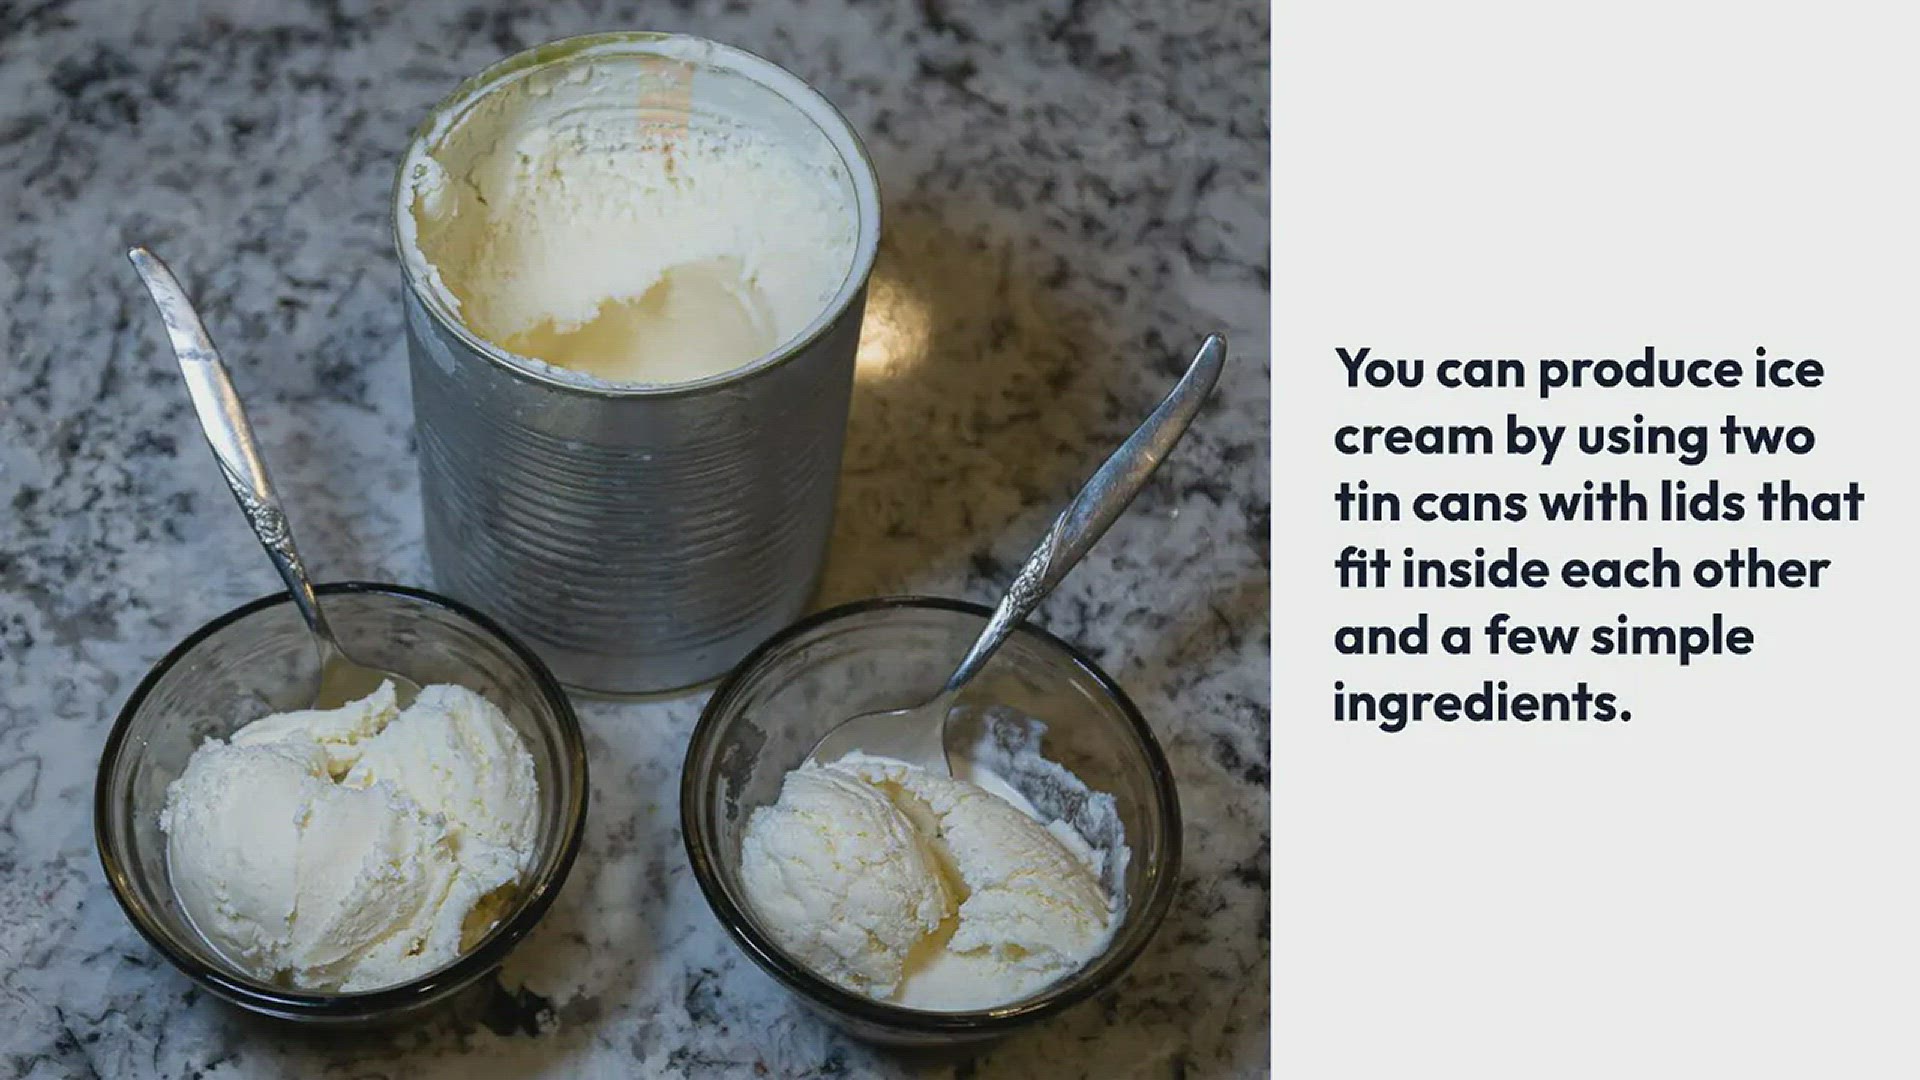 'Video thumbnail for Homemade Ice Cream with Tin Cans'